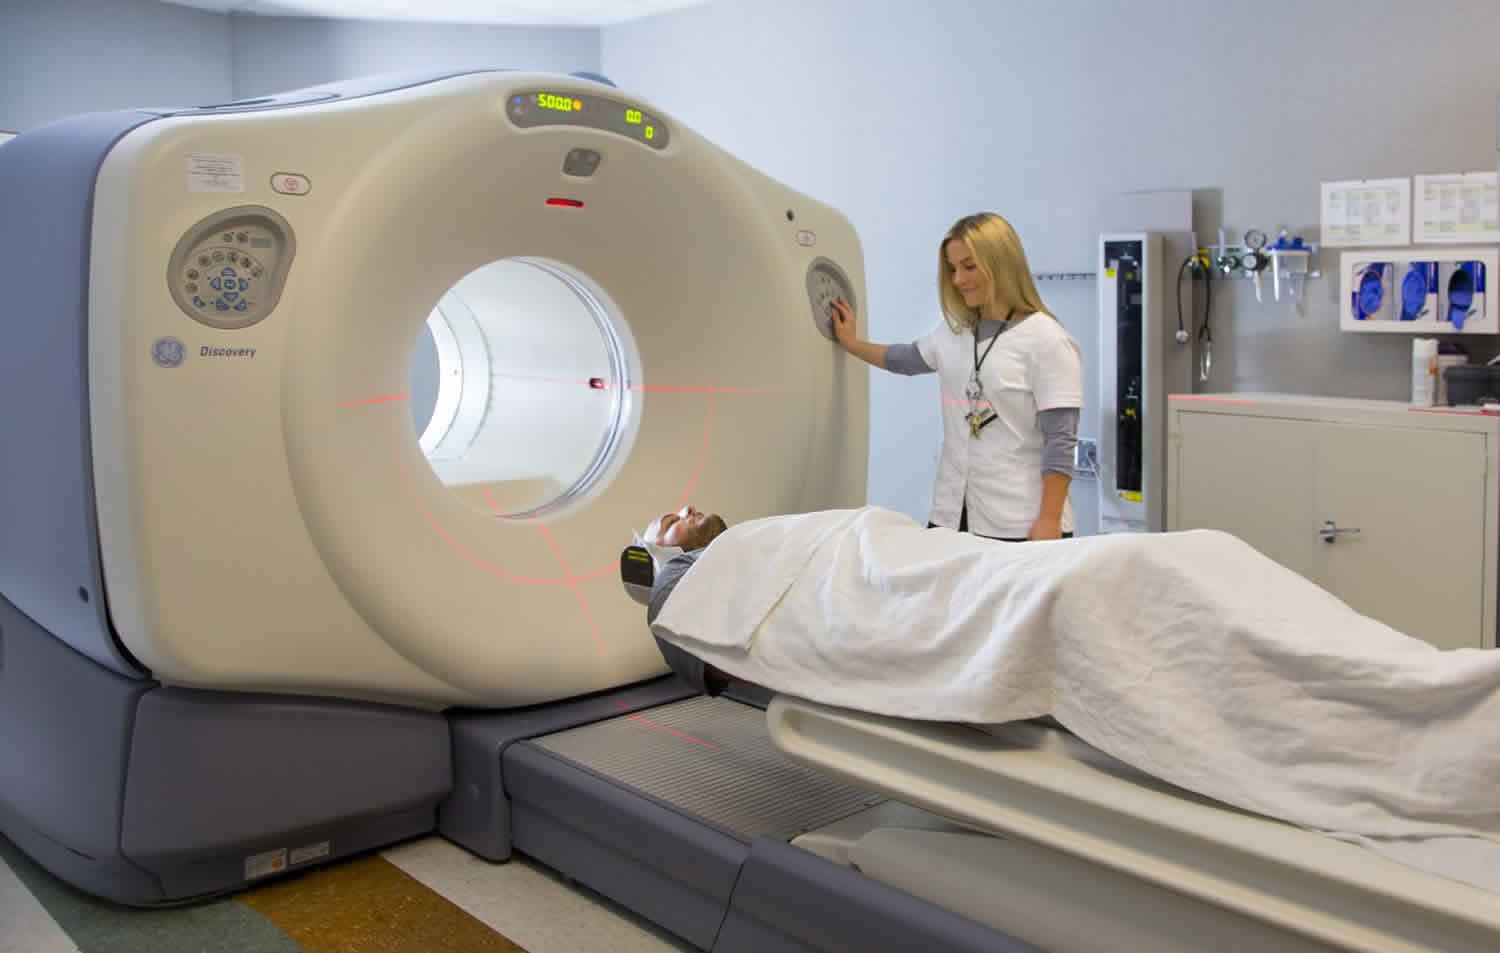 PET scan - how does PET scan work, uses and side effects of PET scan